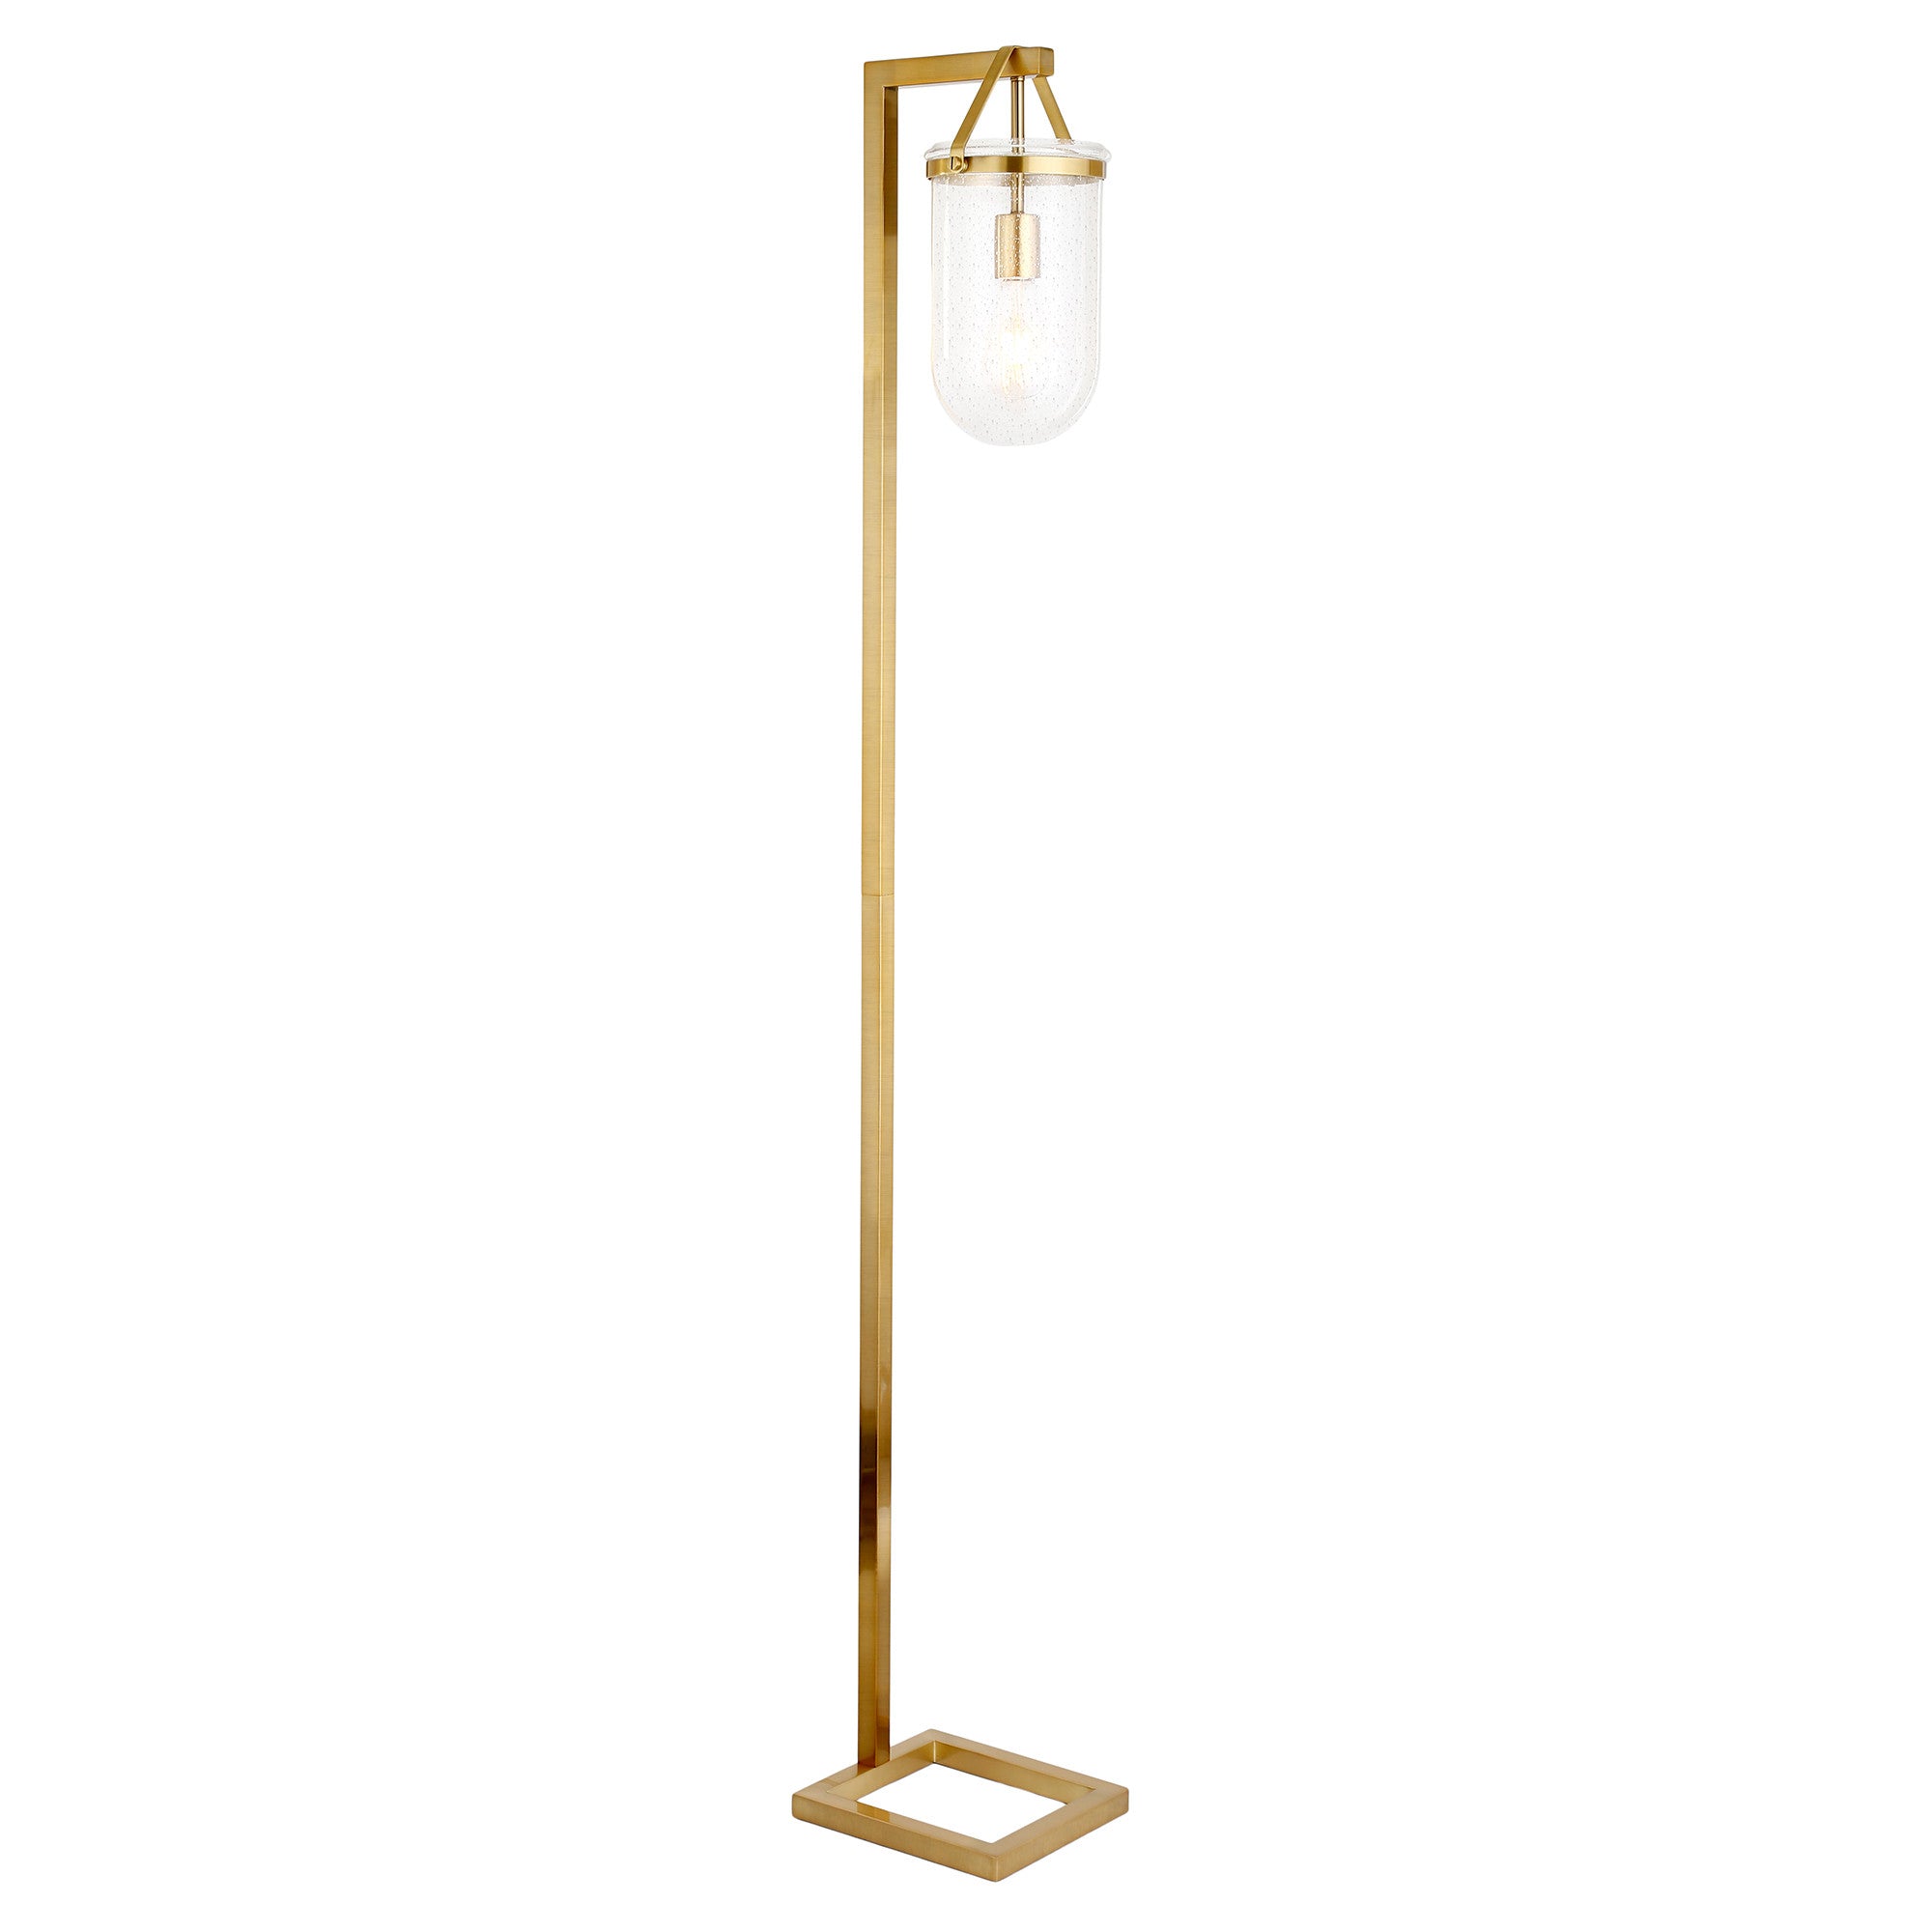 68" Brass Arched Floor Lamp With Clear Seeded Glass Dome Shade